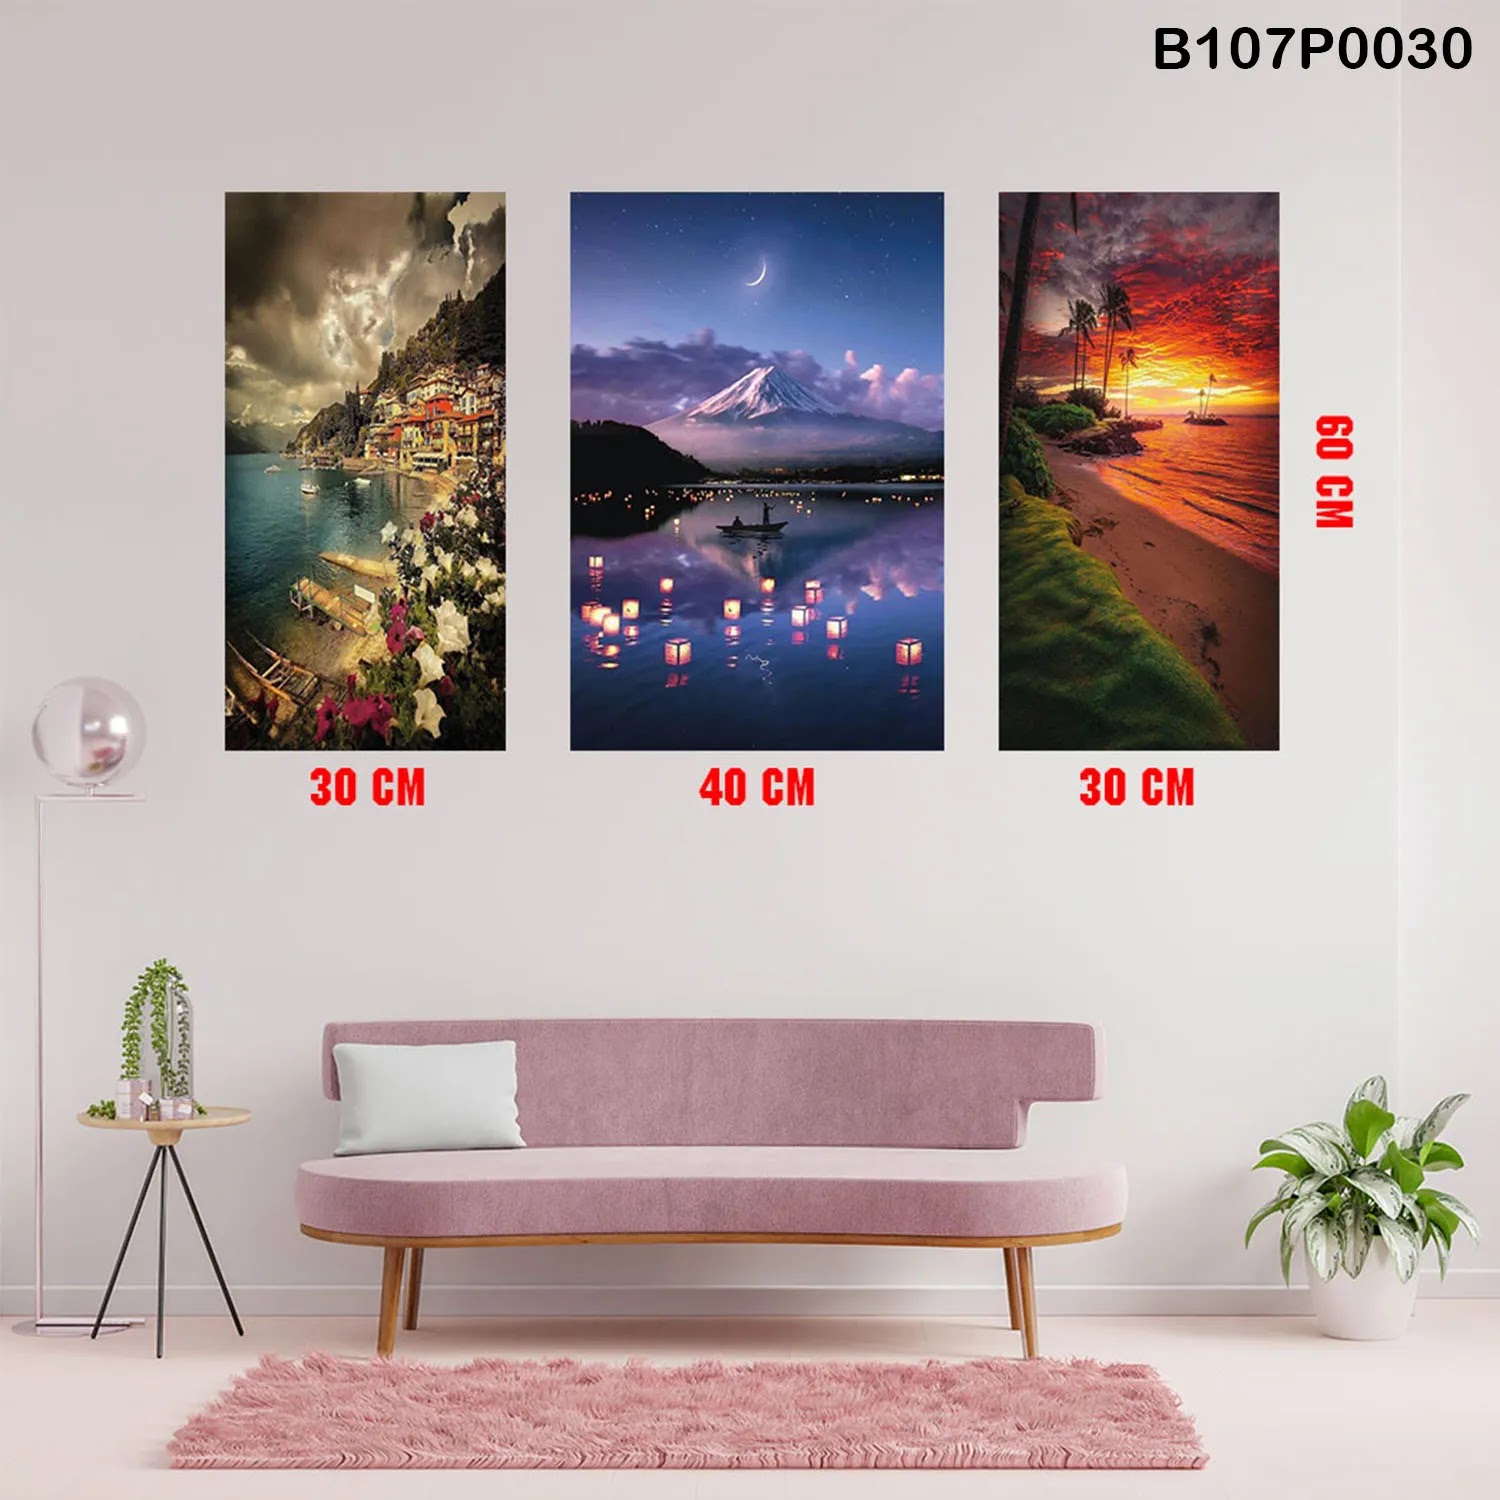 Triptych panel with the sunset, mountain and beach